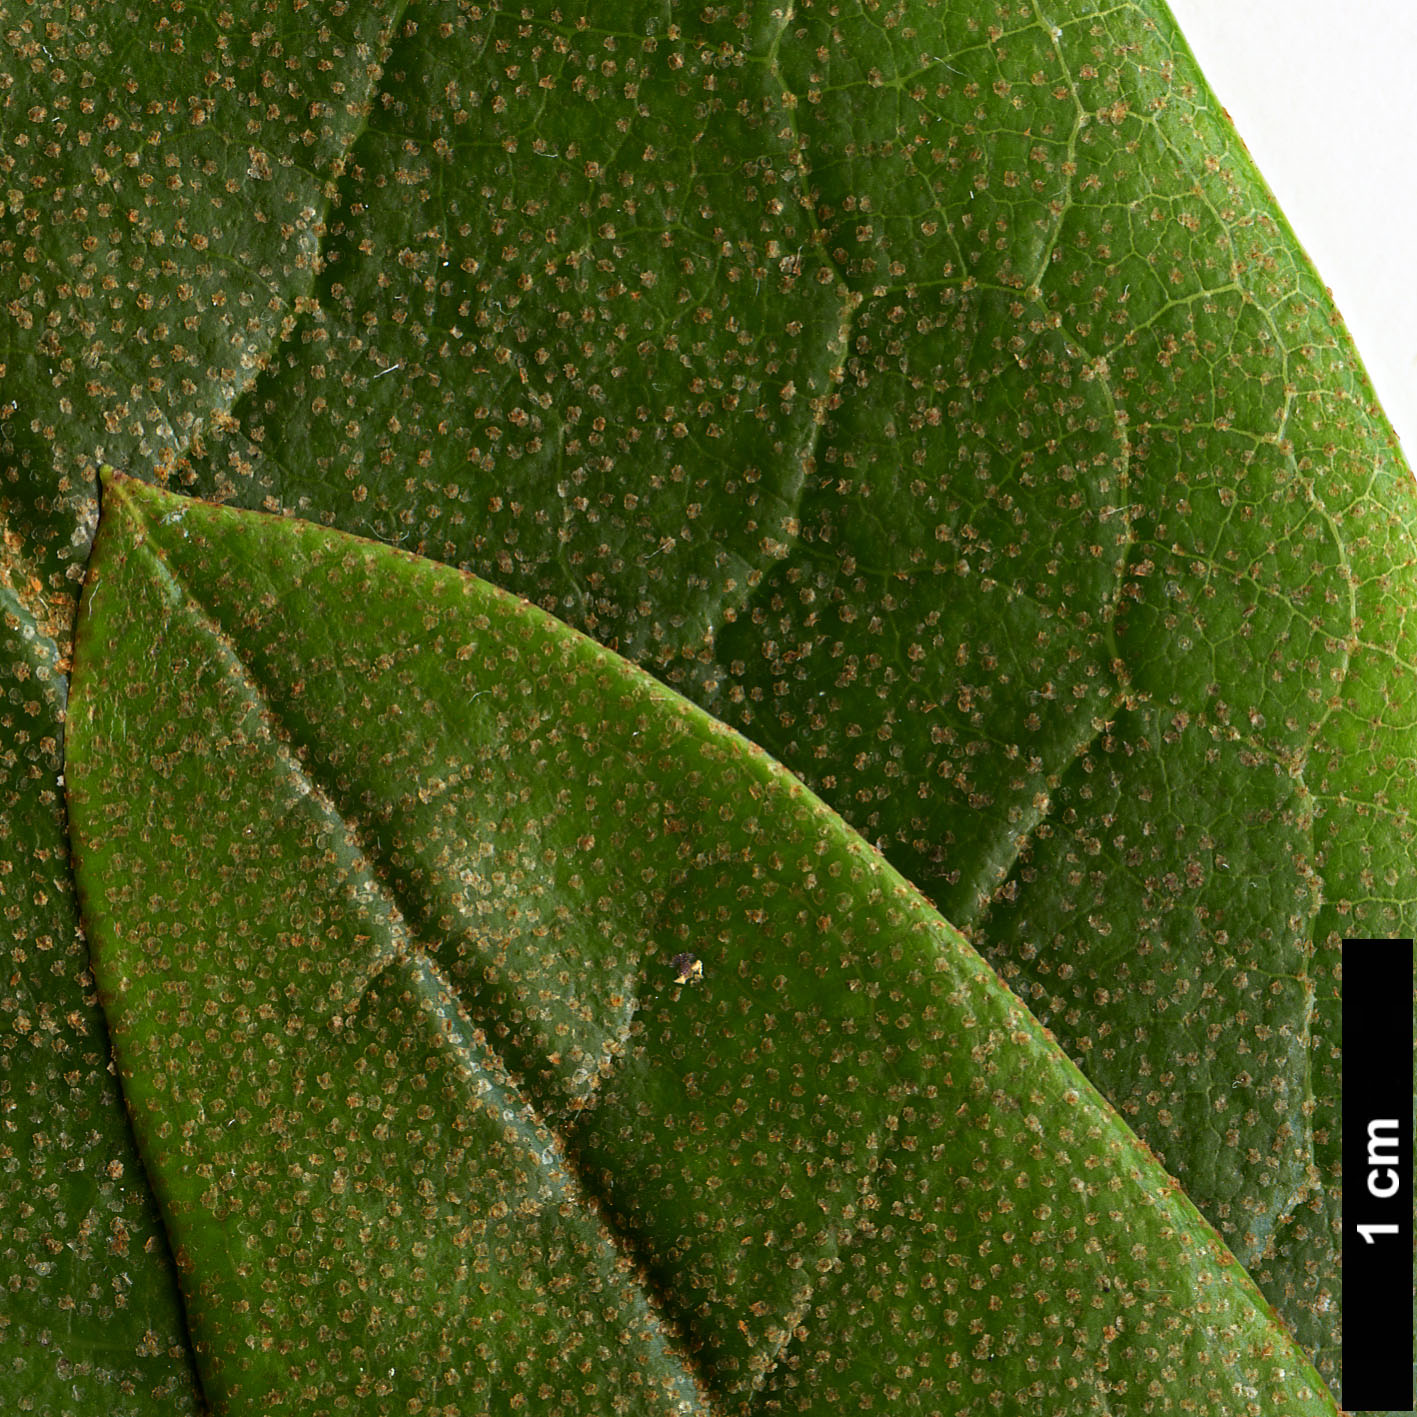 High resolution image: Family: Ericaceae - Genus: Rhododendron - Taxon: excellens